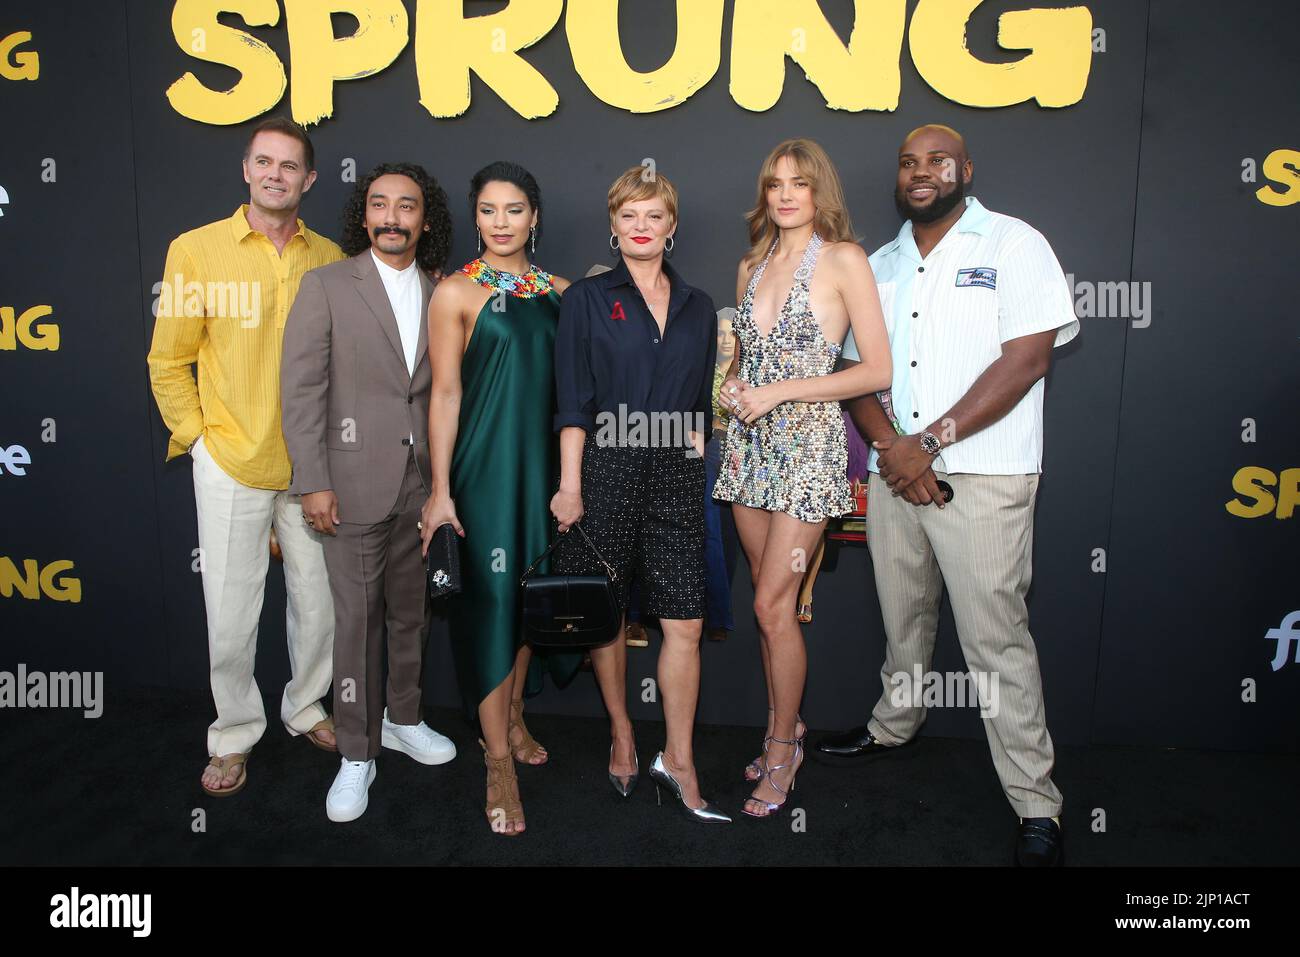 Los Angeles, California, USA. 14th Aug, 2022. Garret Dillahunt, Martha Plimpton, Phillip Garcia, Shakira Barrera, Clare Gillies, James Earl, Ever Carradine. Red Carpet Premiere Of Freevee's 'Sprung' held at the Hollywood Forever Cemetery in Los Angeles. Credit: AdMedia Photo via/Newscom/Alamy Live News Stock Photo